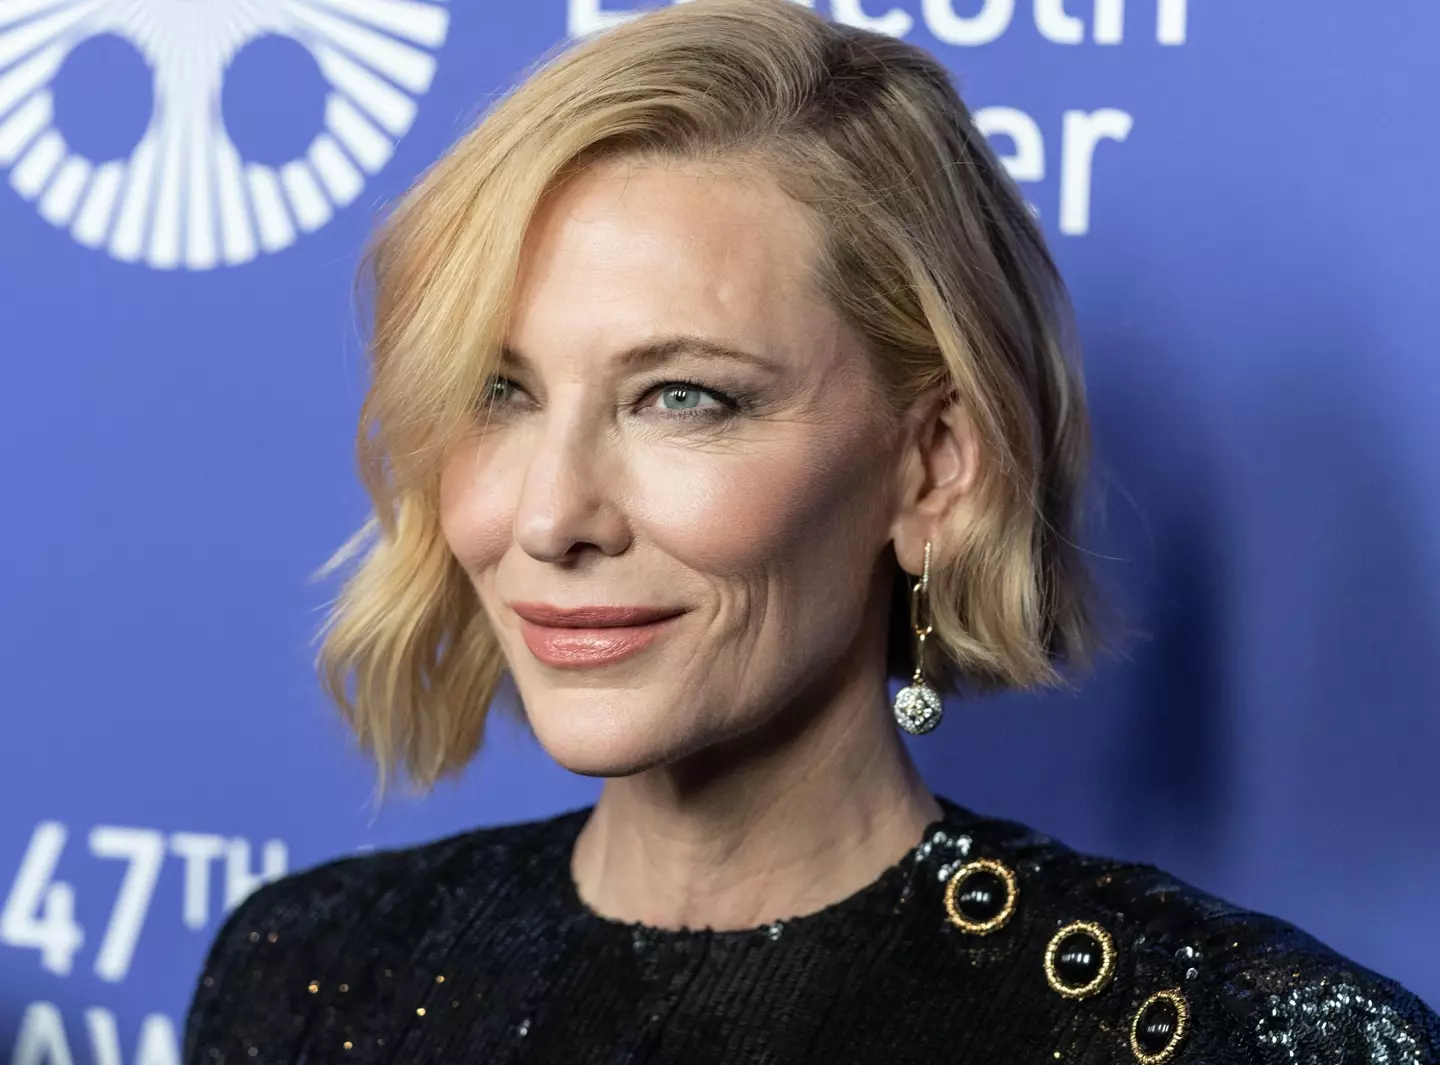 Cate Blanchett has hit out at Musk's deal to buy Twitter.